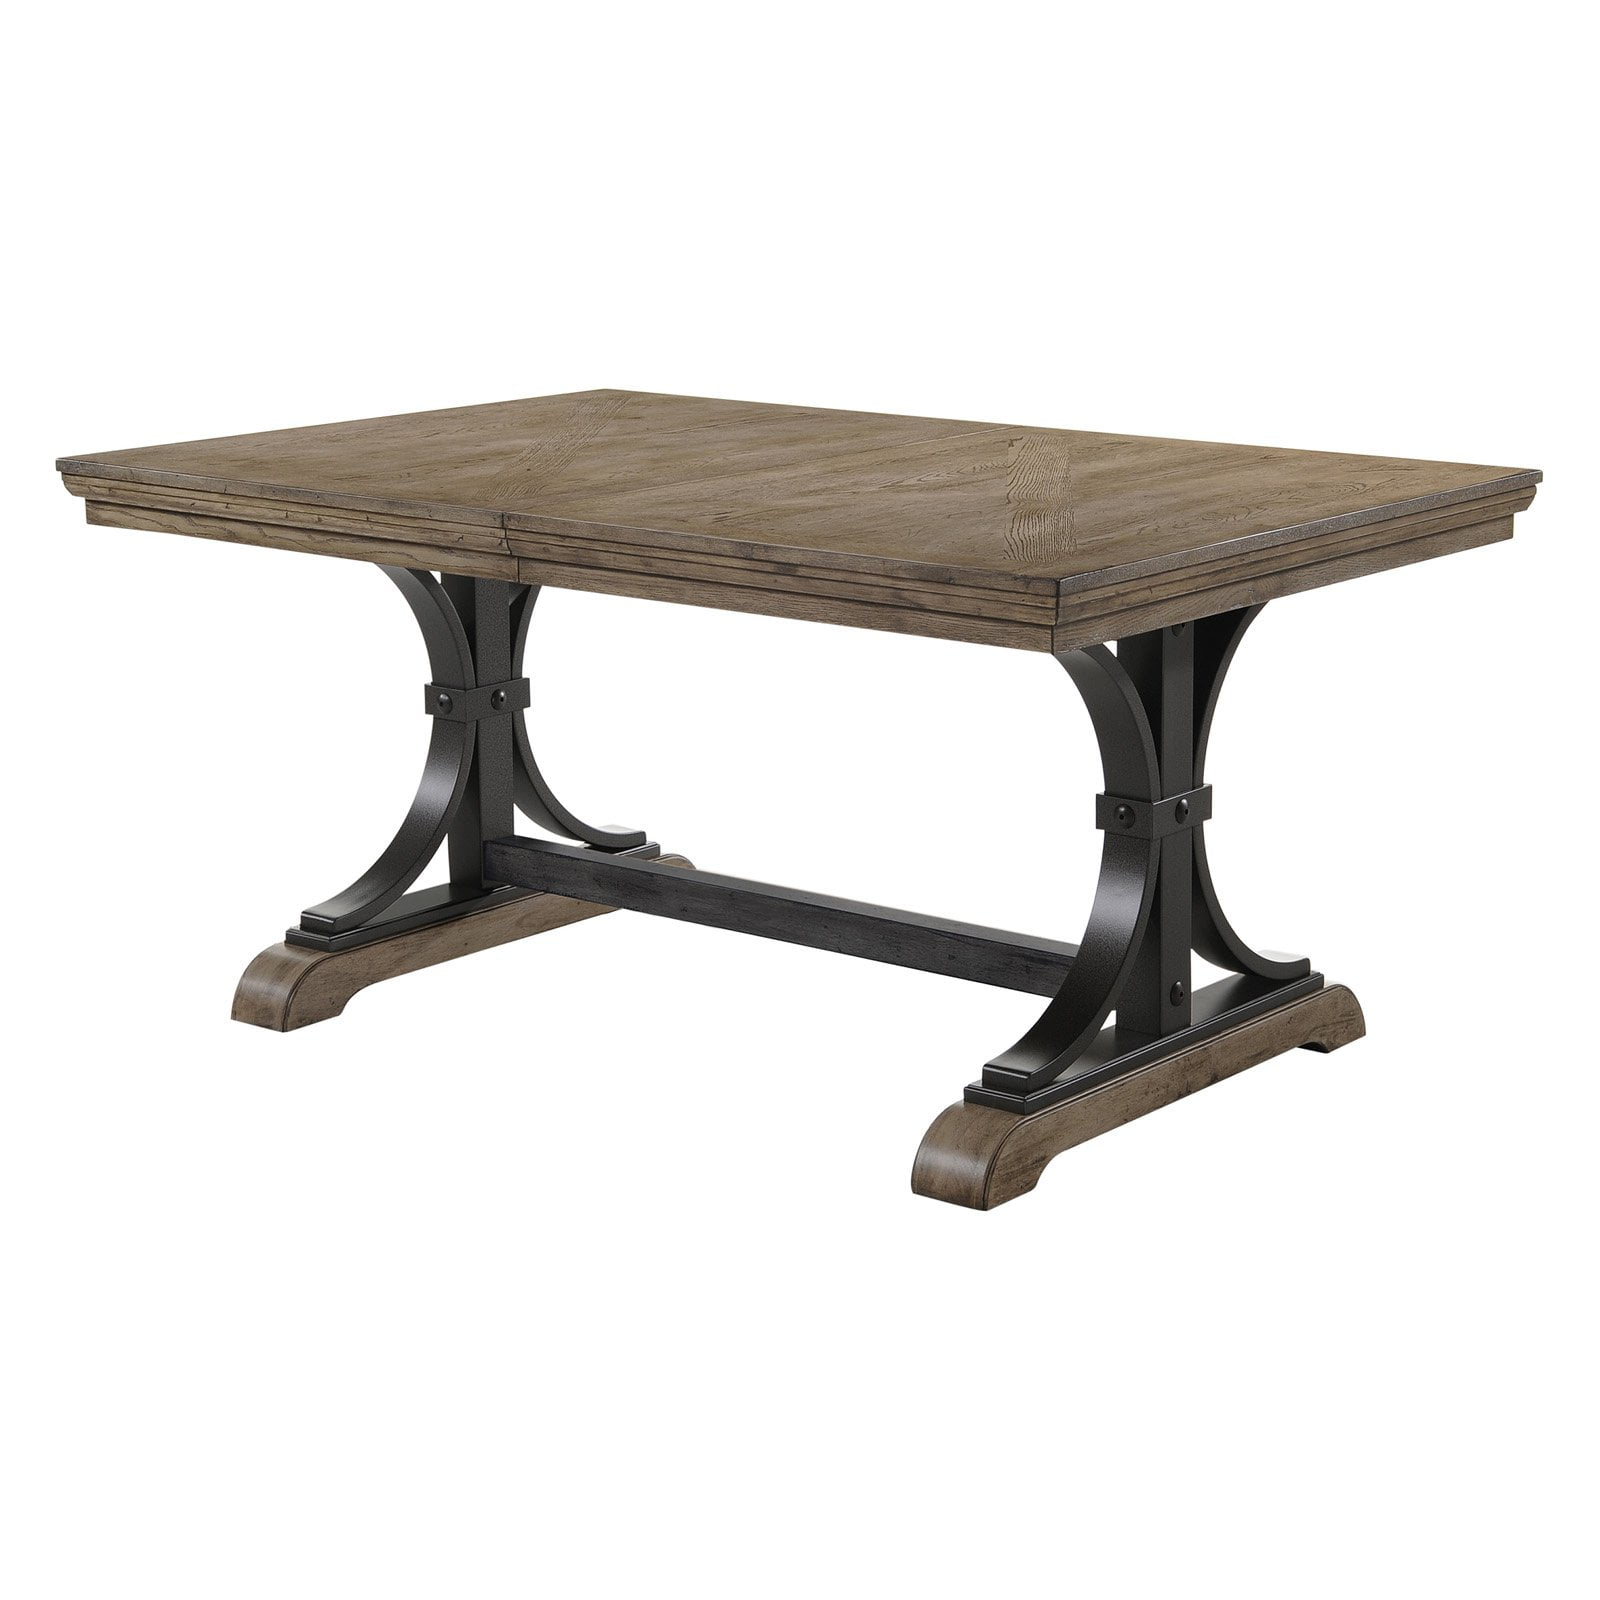 Birmingham Driftwood Finish Dining Table with Butterfly Leaf